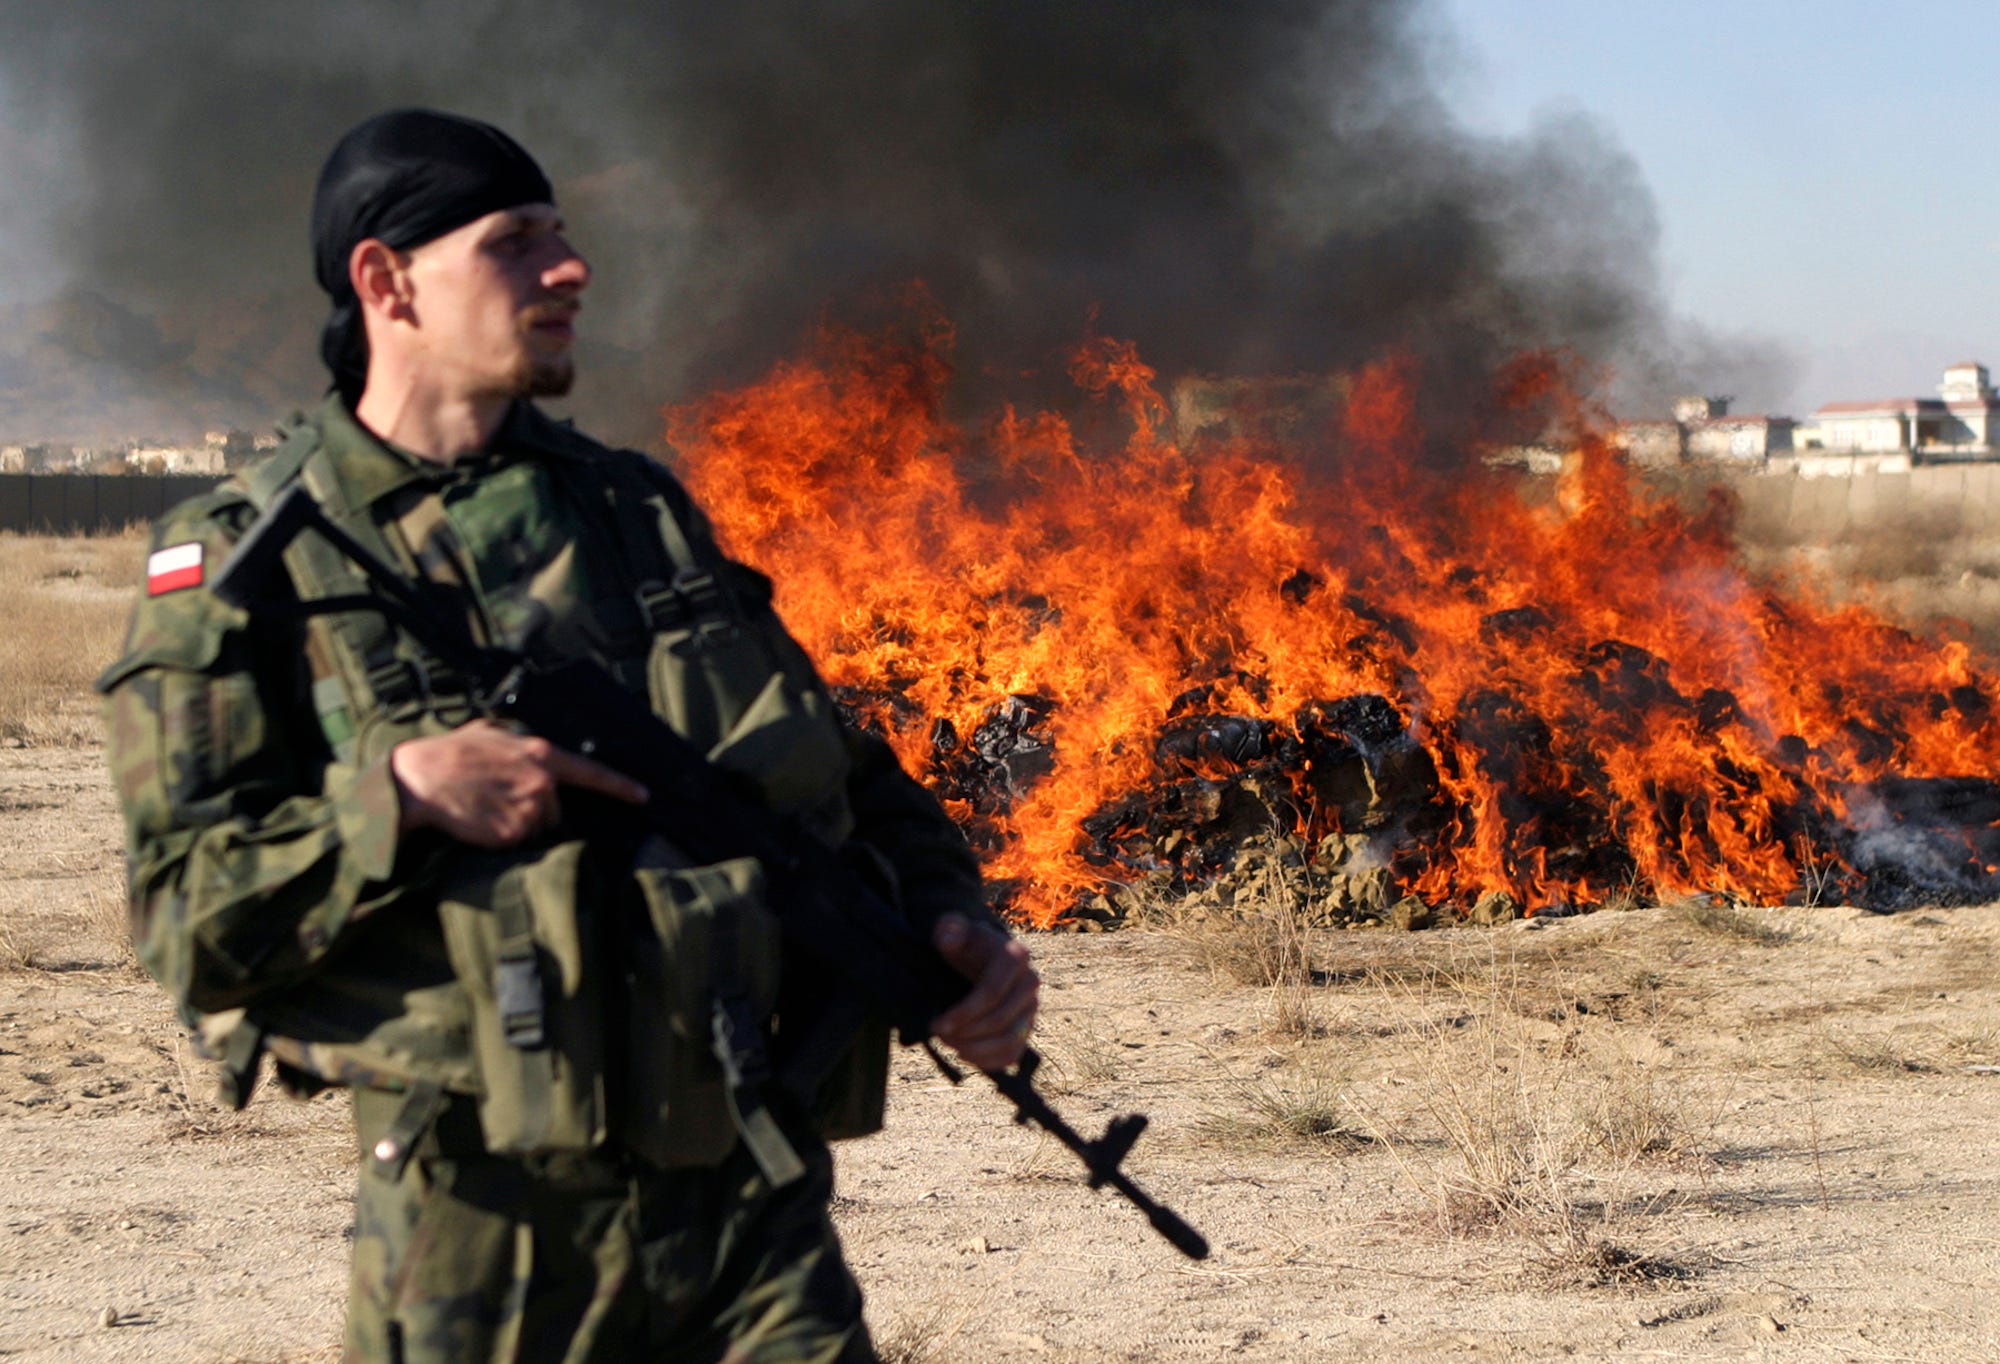 A Polish soldier stands guard in front of a pile of burning illegal narcotics in Afghanistan&#39;s Ghazni province in November 2008